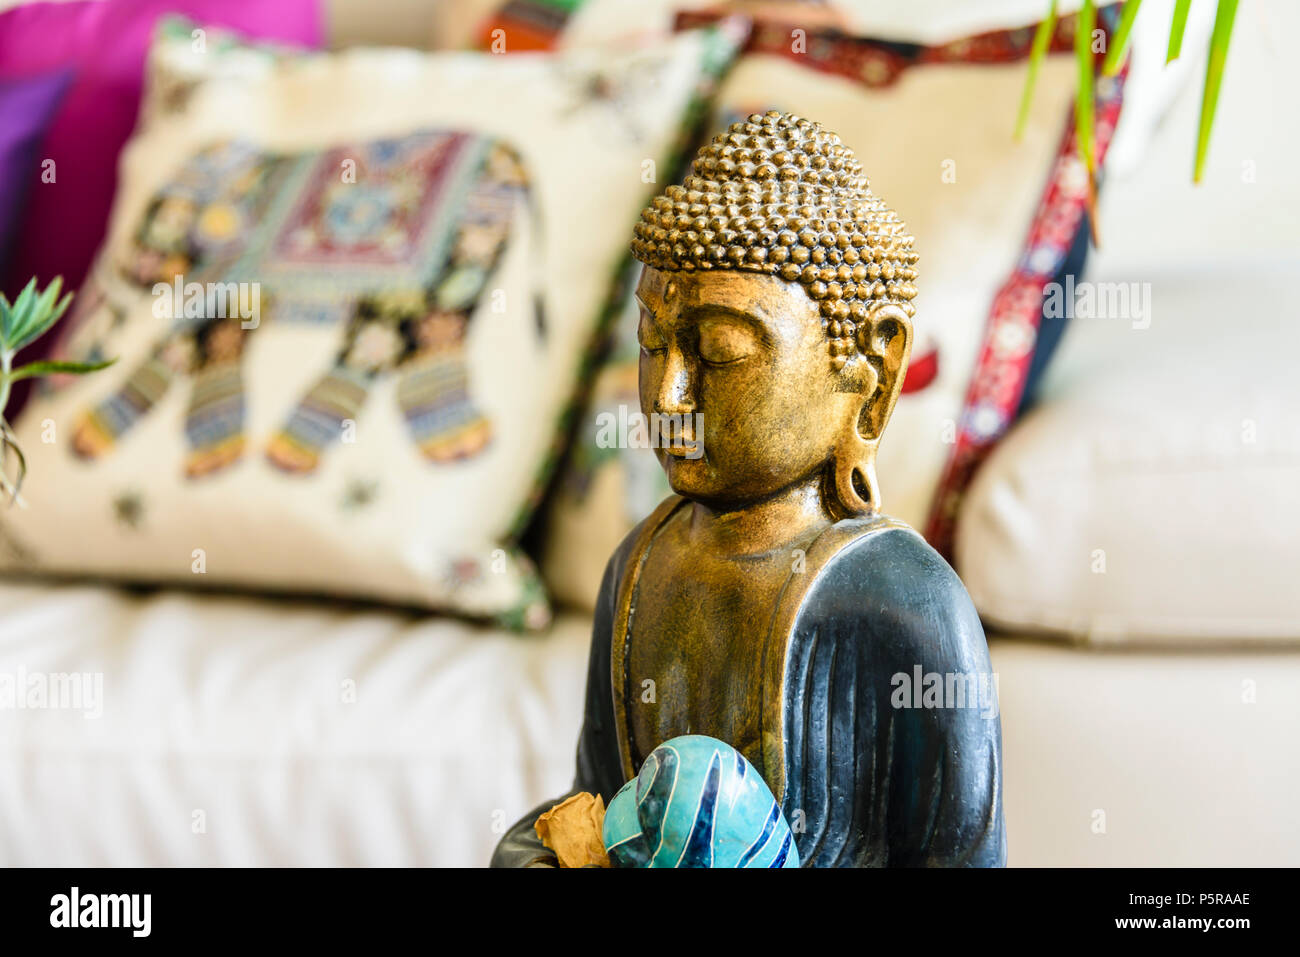 Statue Of Contemplating Buddha Inside A Modern Trendy House